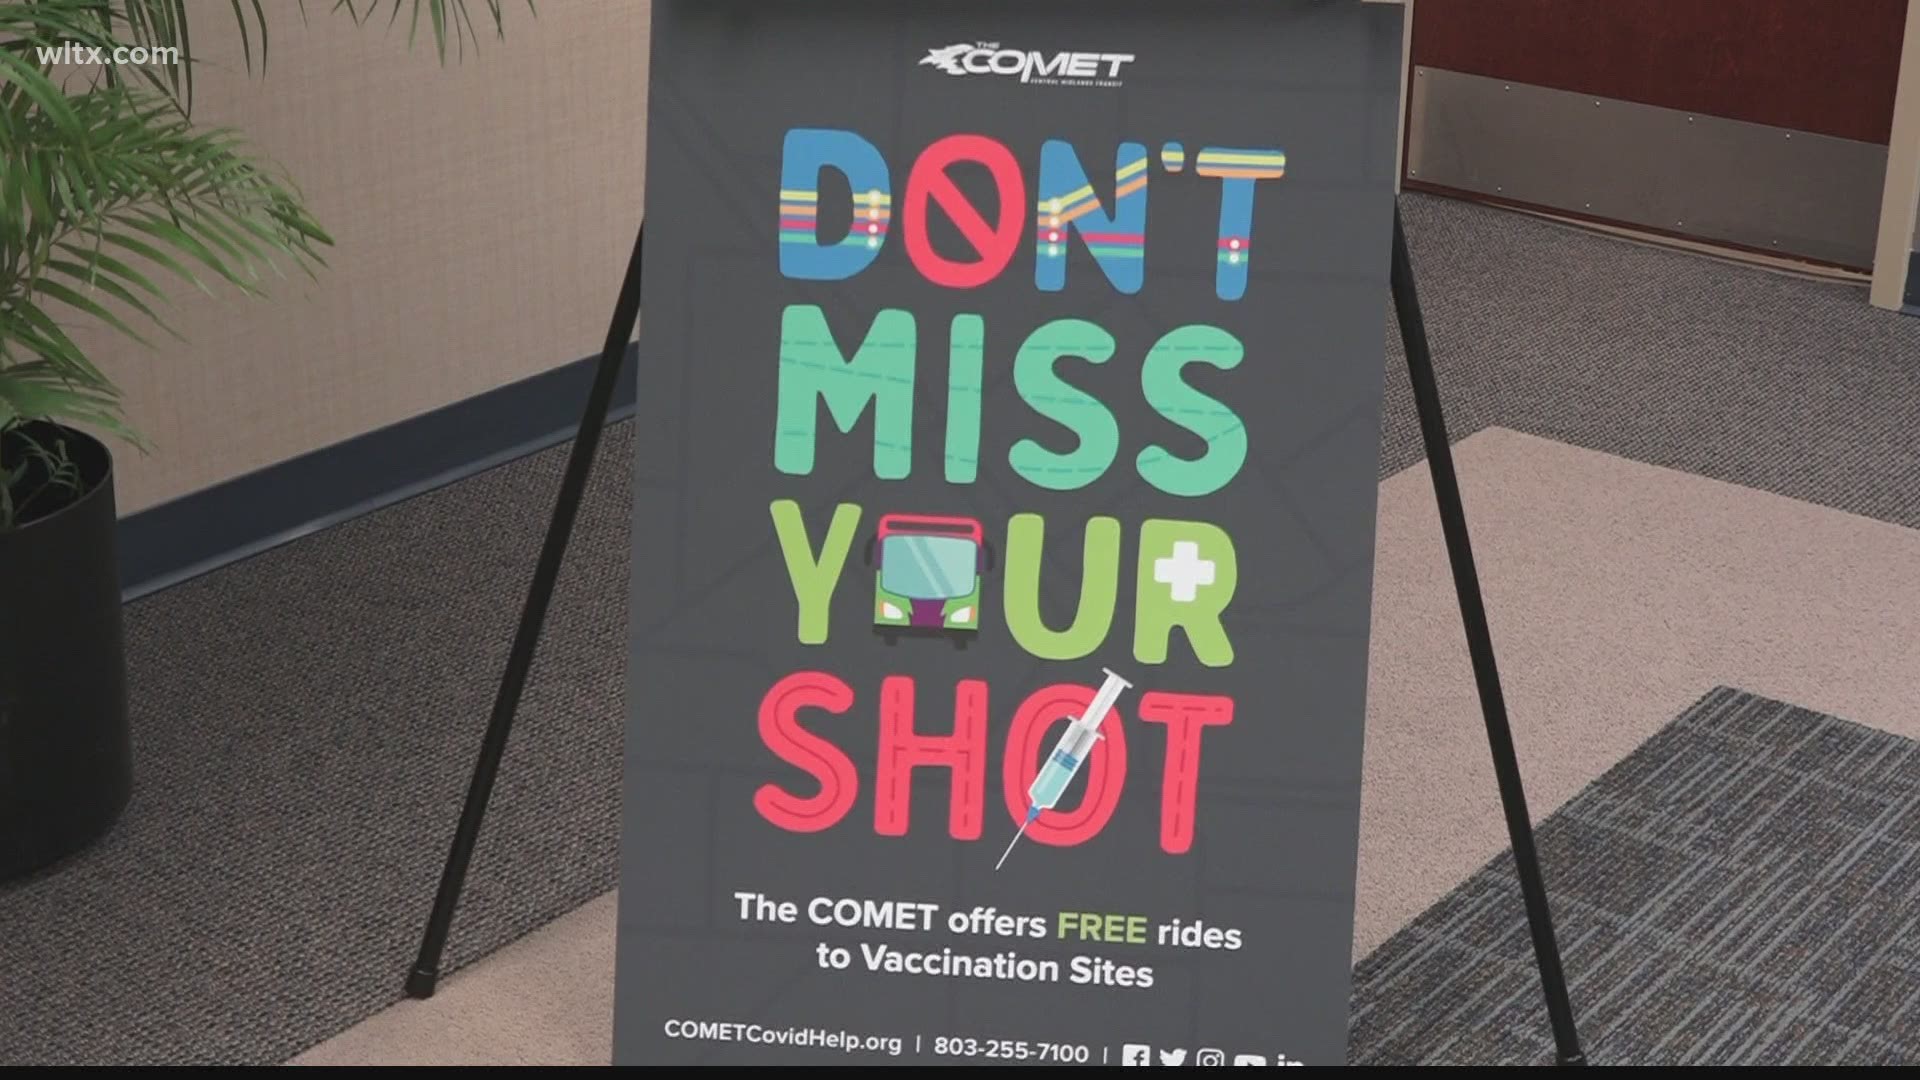 Transportation is free of charge for those eligible to receive their vaccine, according to The COMET